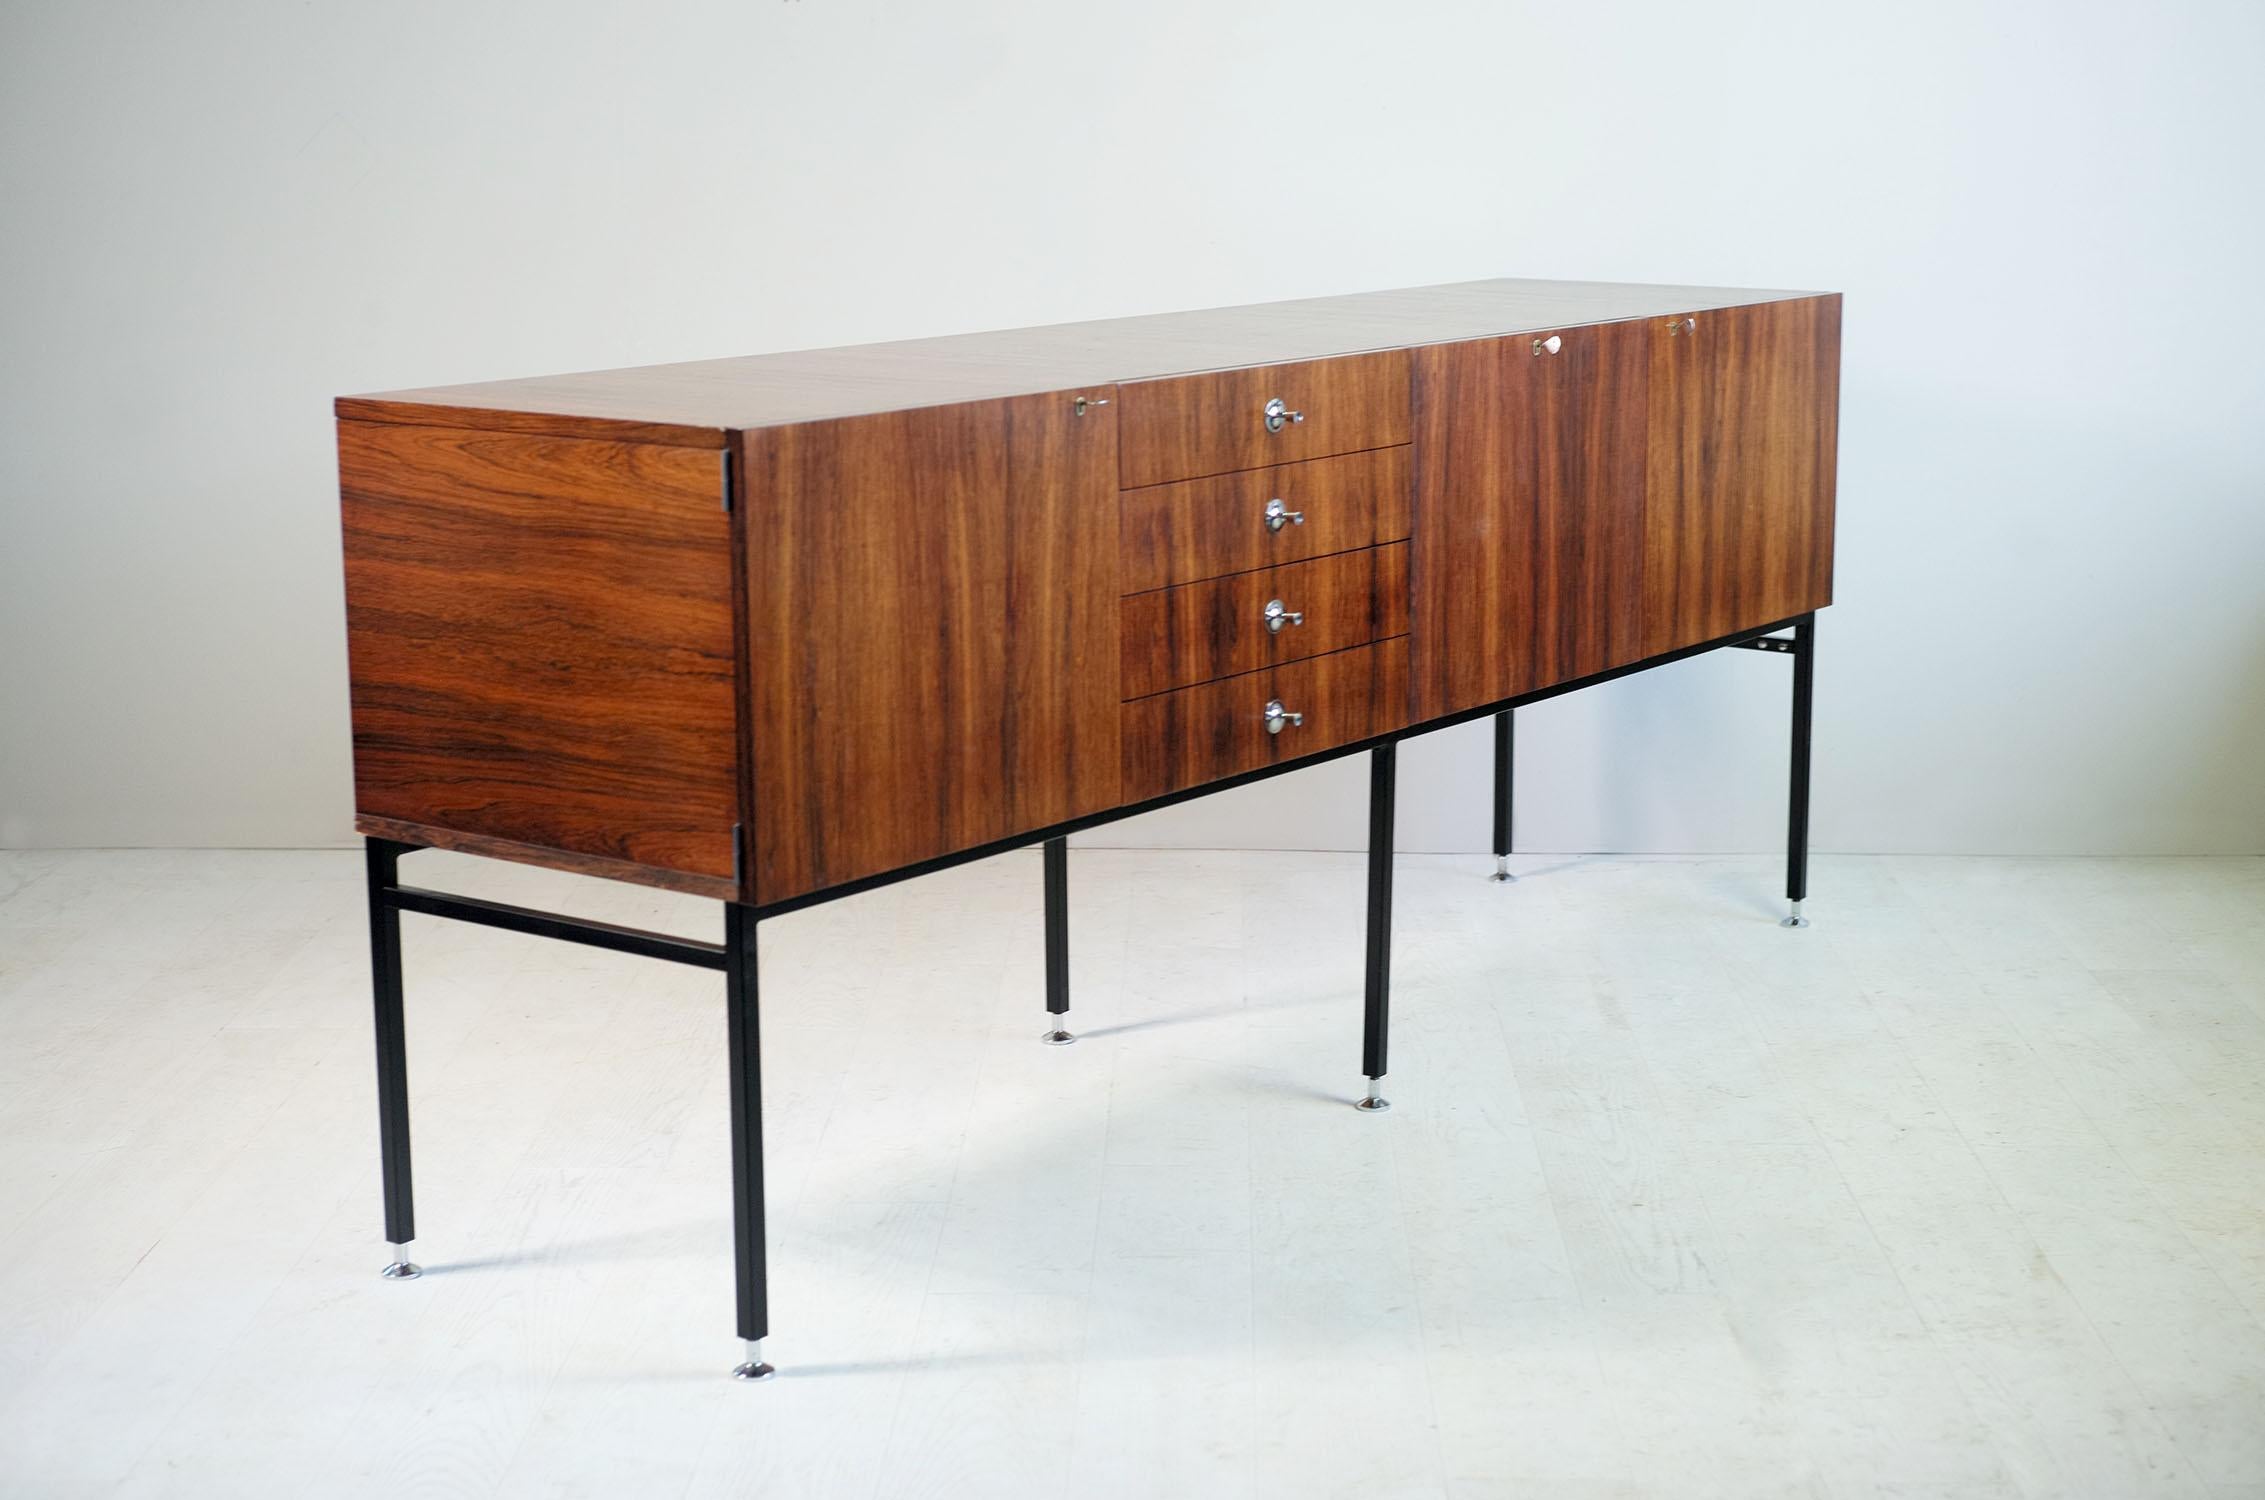 Alain Richard, Large sideboard in rosewood, chromed and black lacquered metal, 800 series edited by Meubles TV, France 1958. With a drop-down bar with its removable tray, four drawers and two doors, this sideboard rests on a base with six feet in